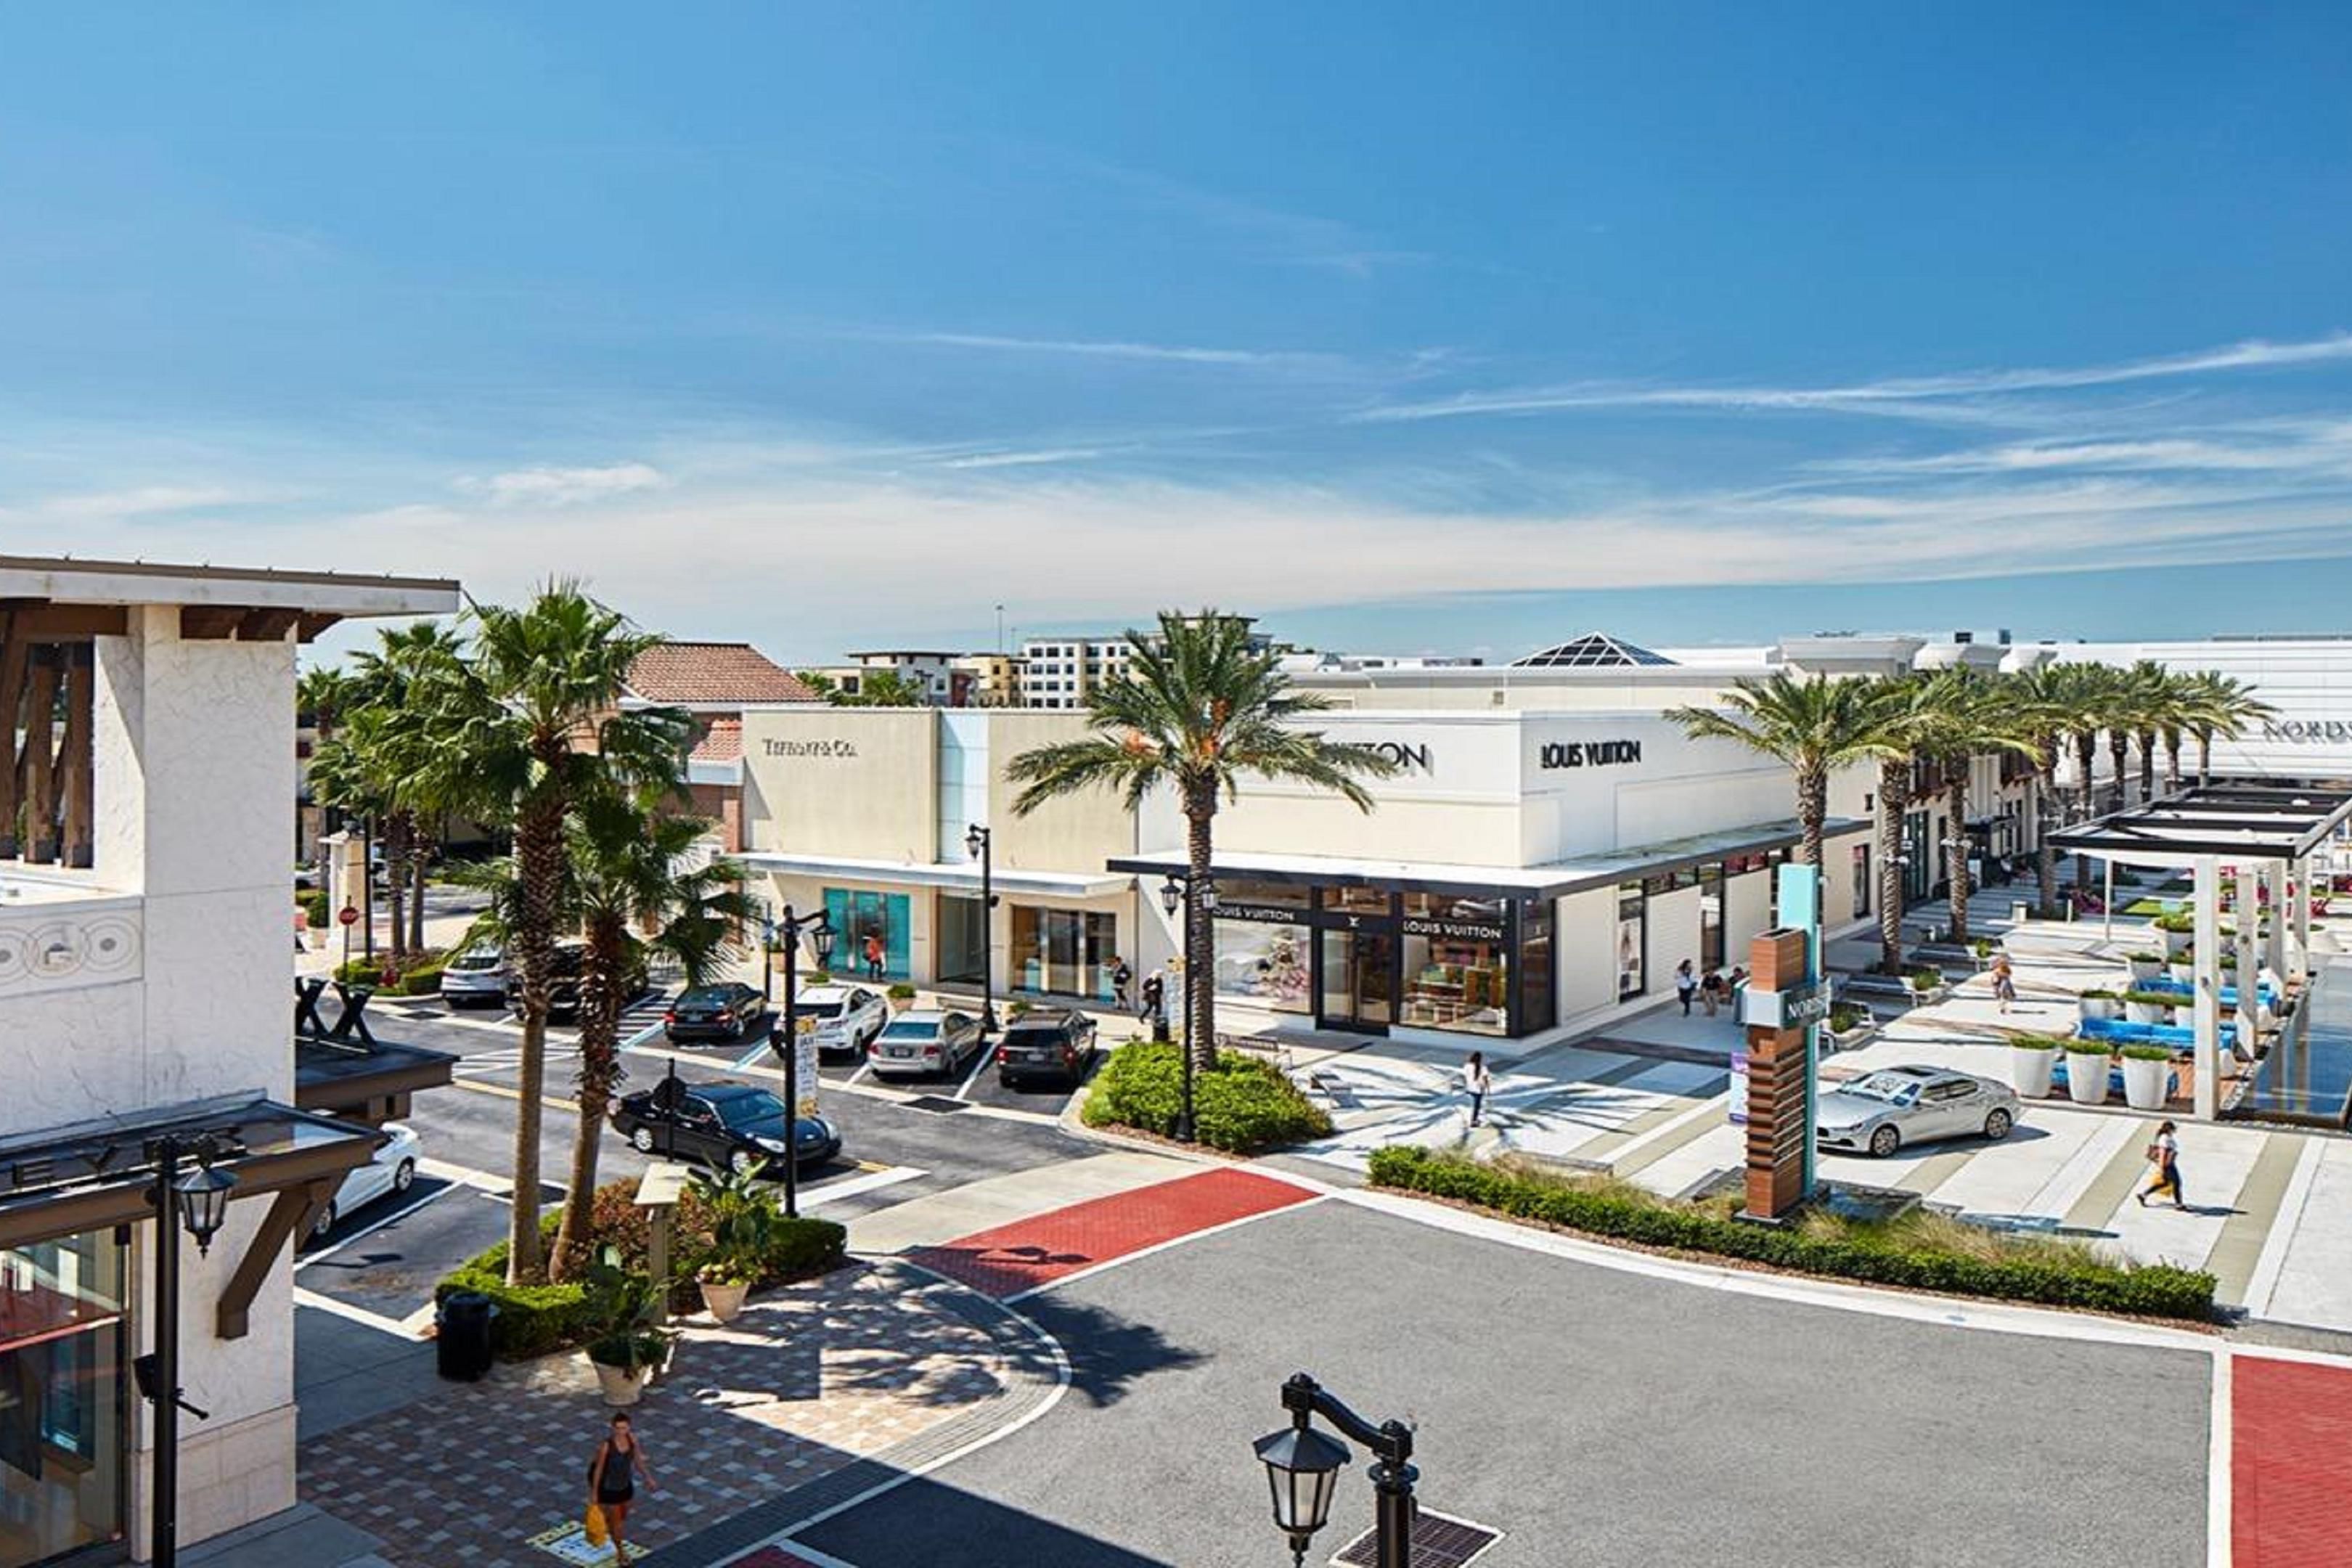 The St. Johns Town Center is an upscale super-regional open-air mall in southeast Jacksonville, Florida.